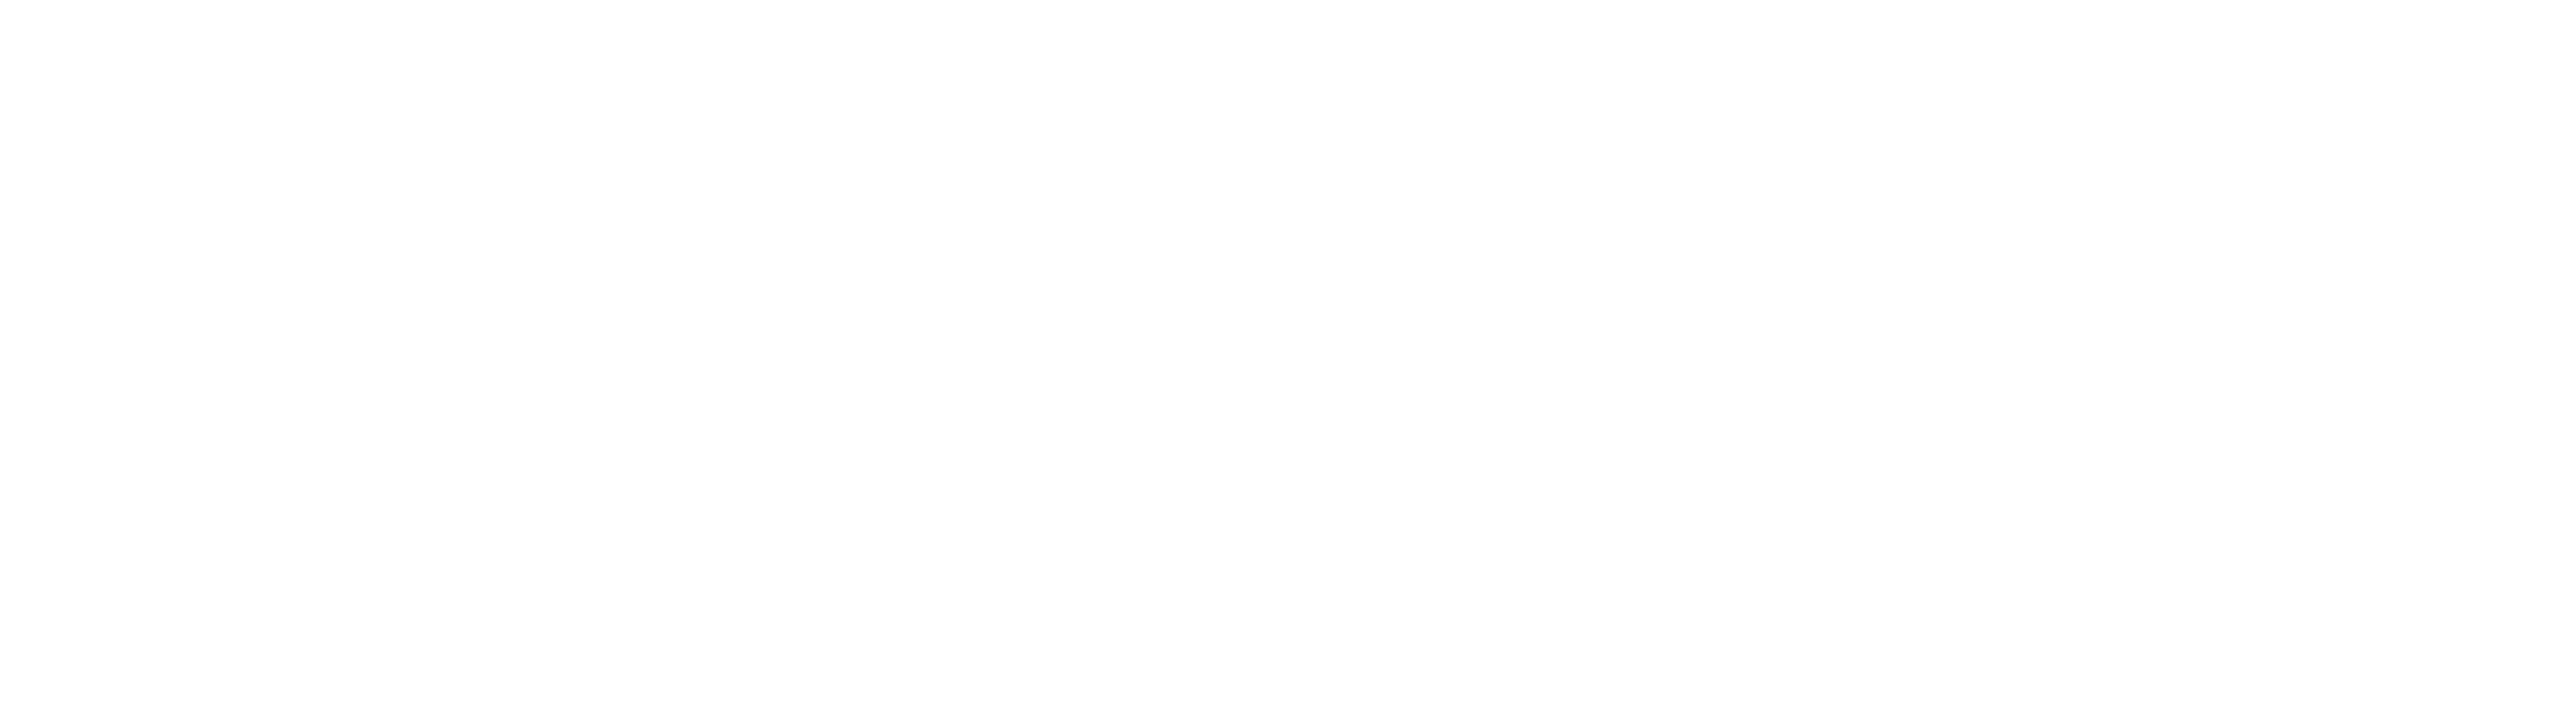 North Jersey Partners Logo White